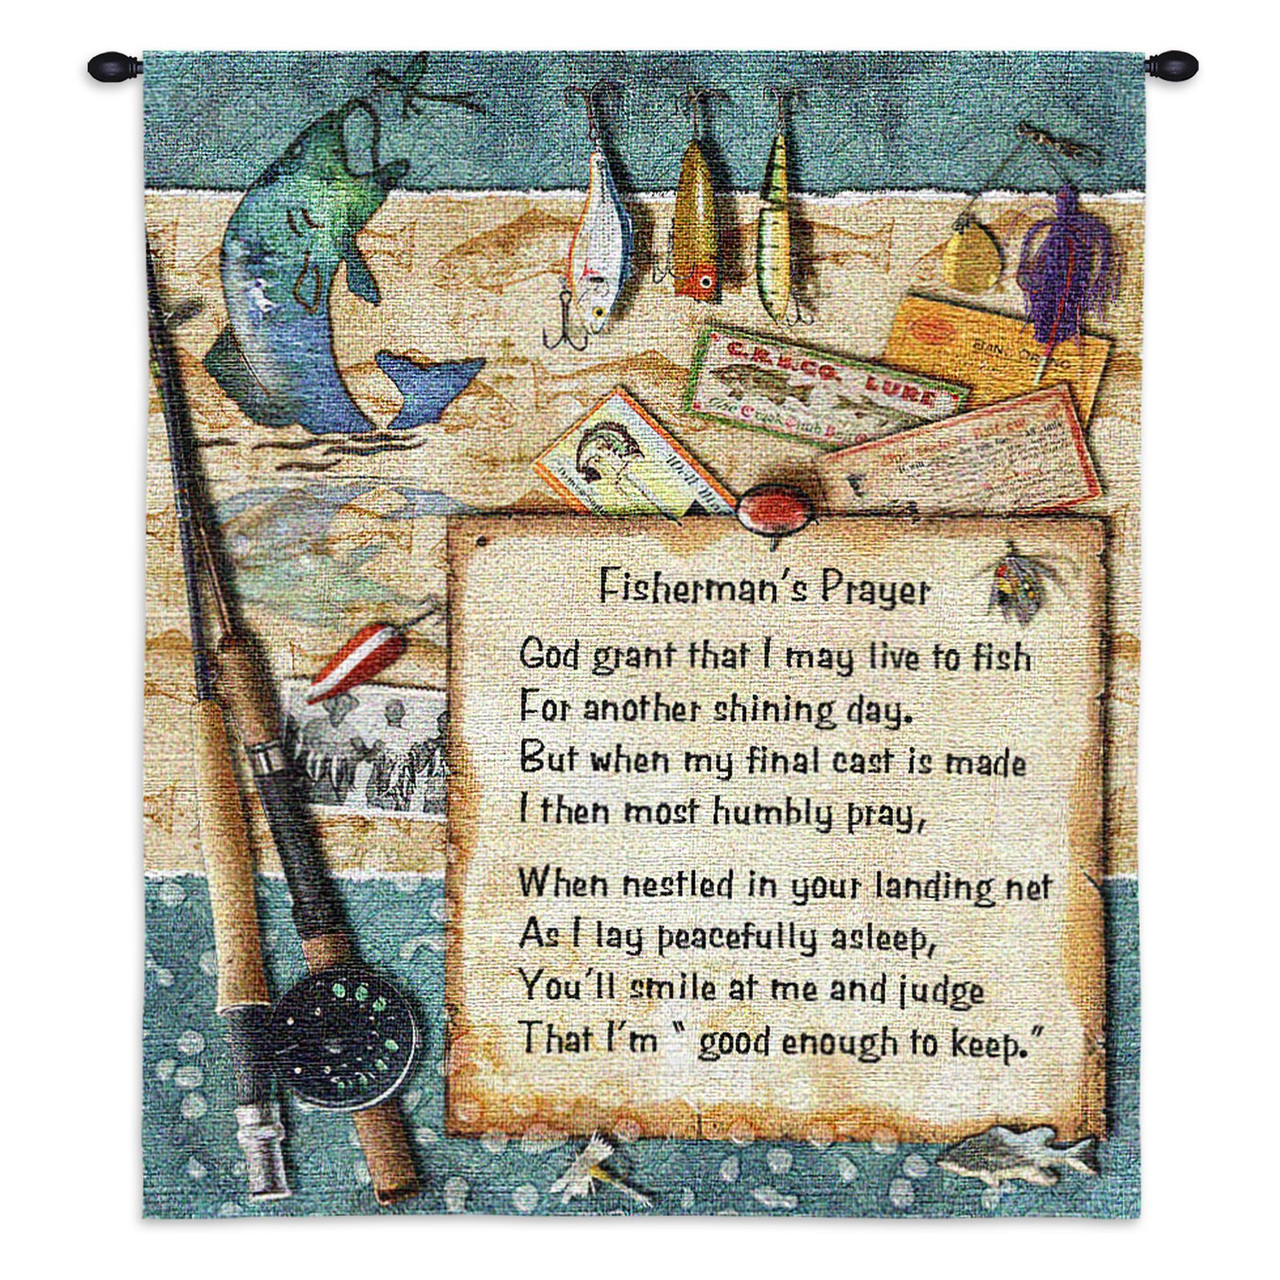 Fisherman's Prayer, Woven Tapestry Wall Art Hanging, Inspirational  Religious Poetry amongst Fishing Gear